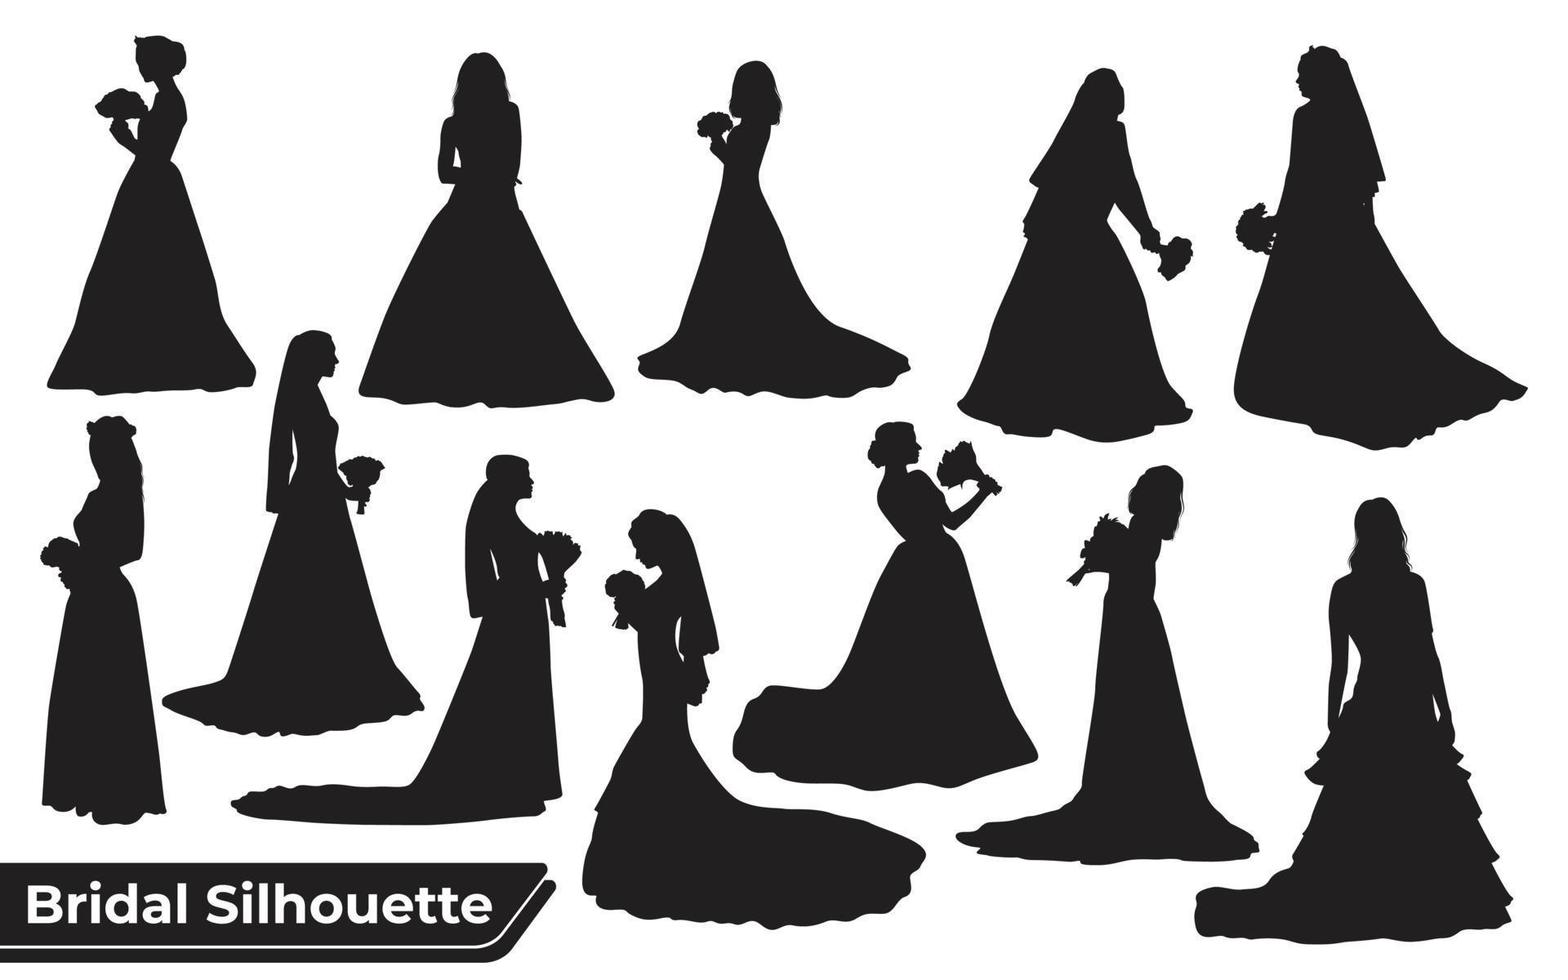 Collection of Bridal silhouettes in different poses set vector